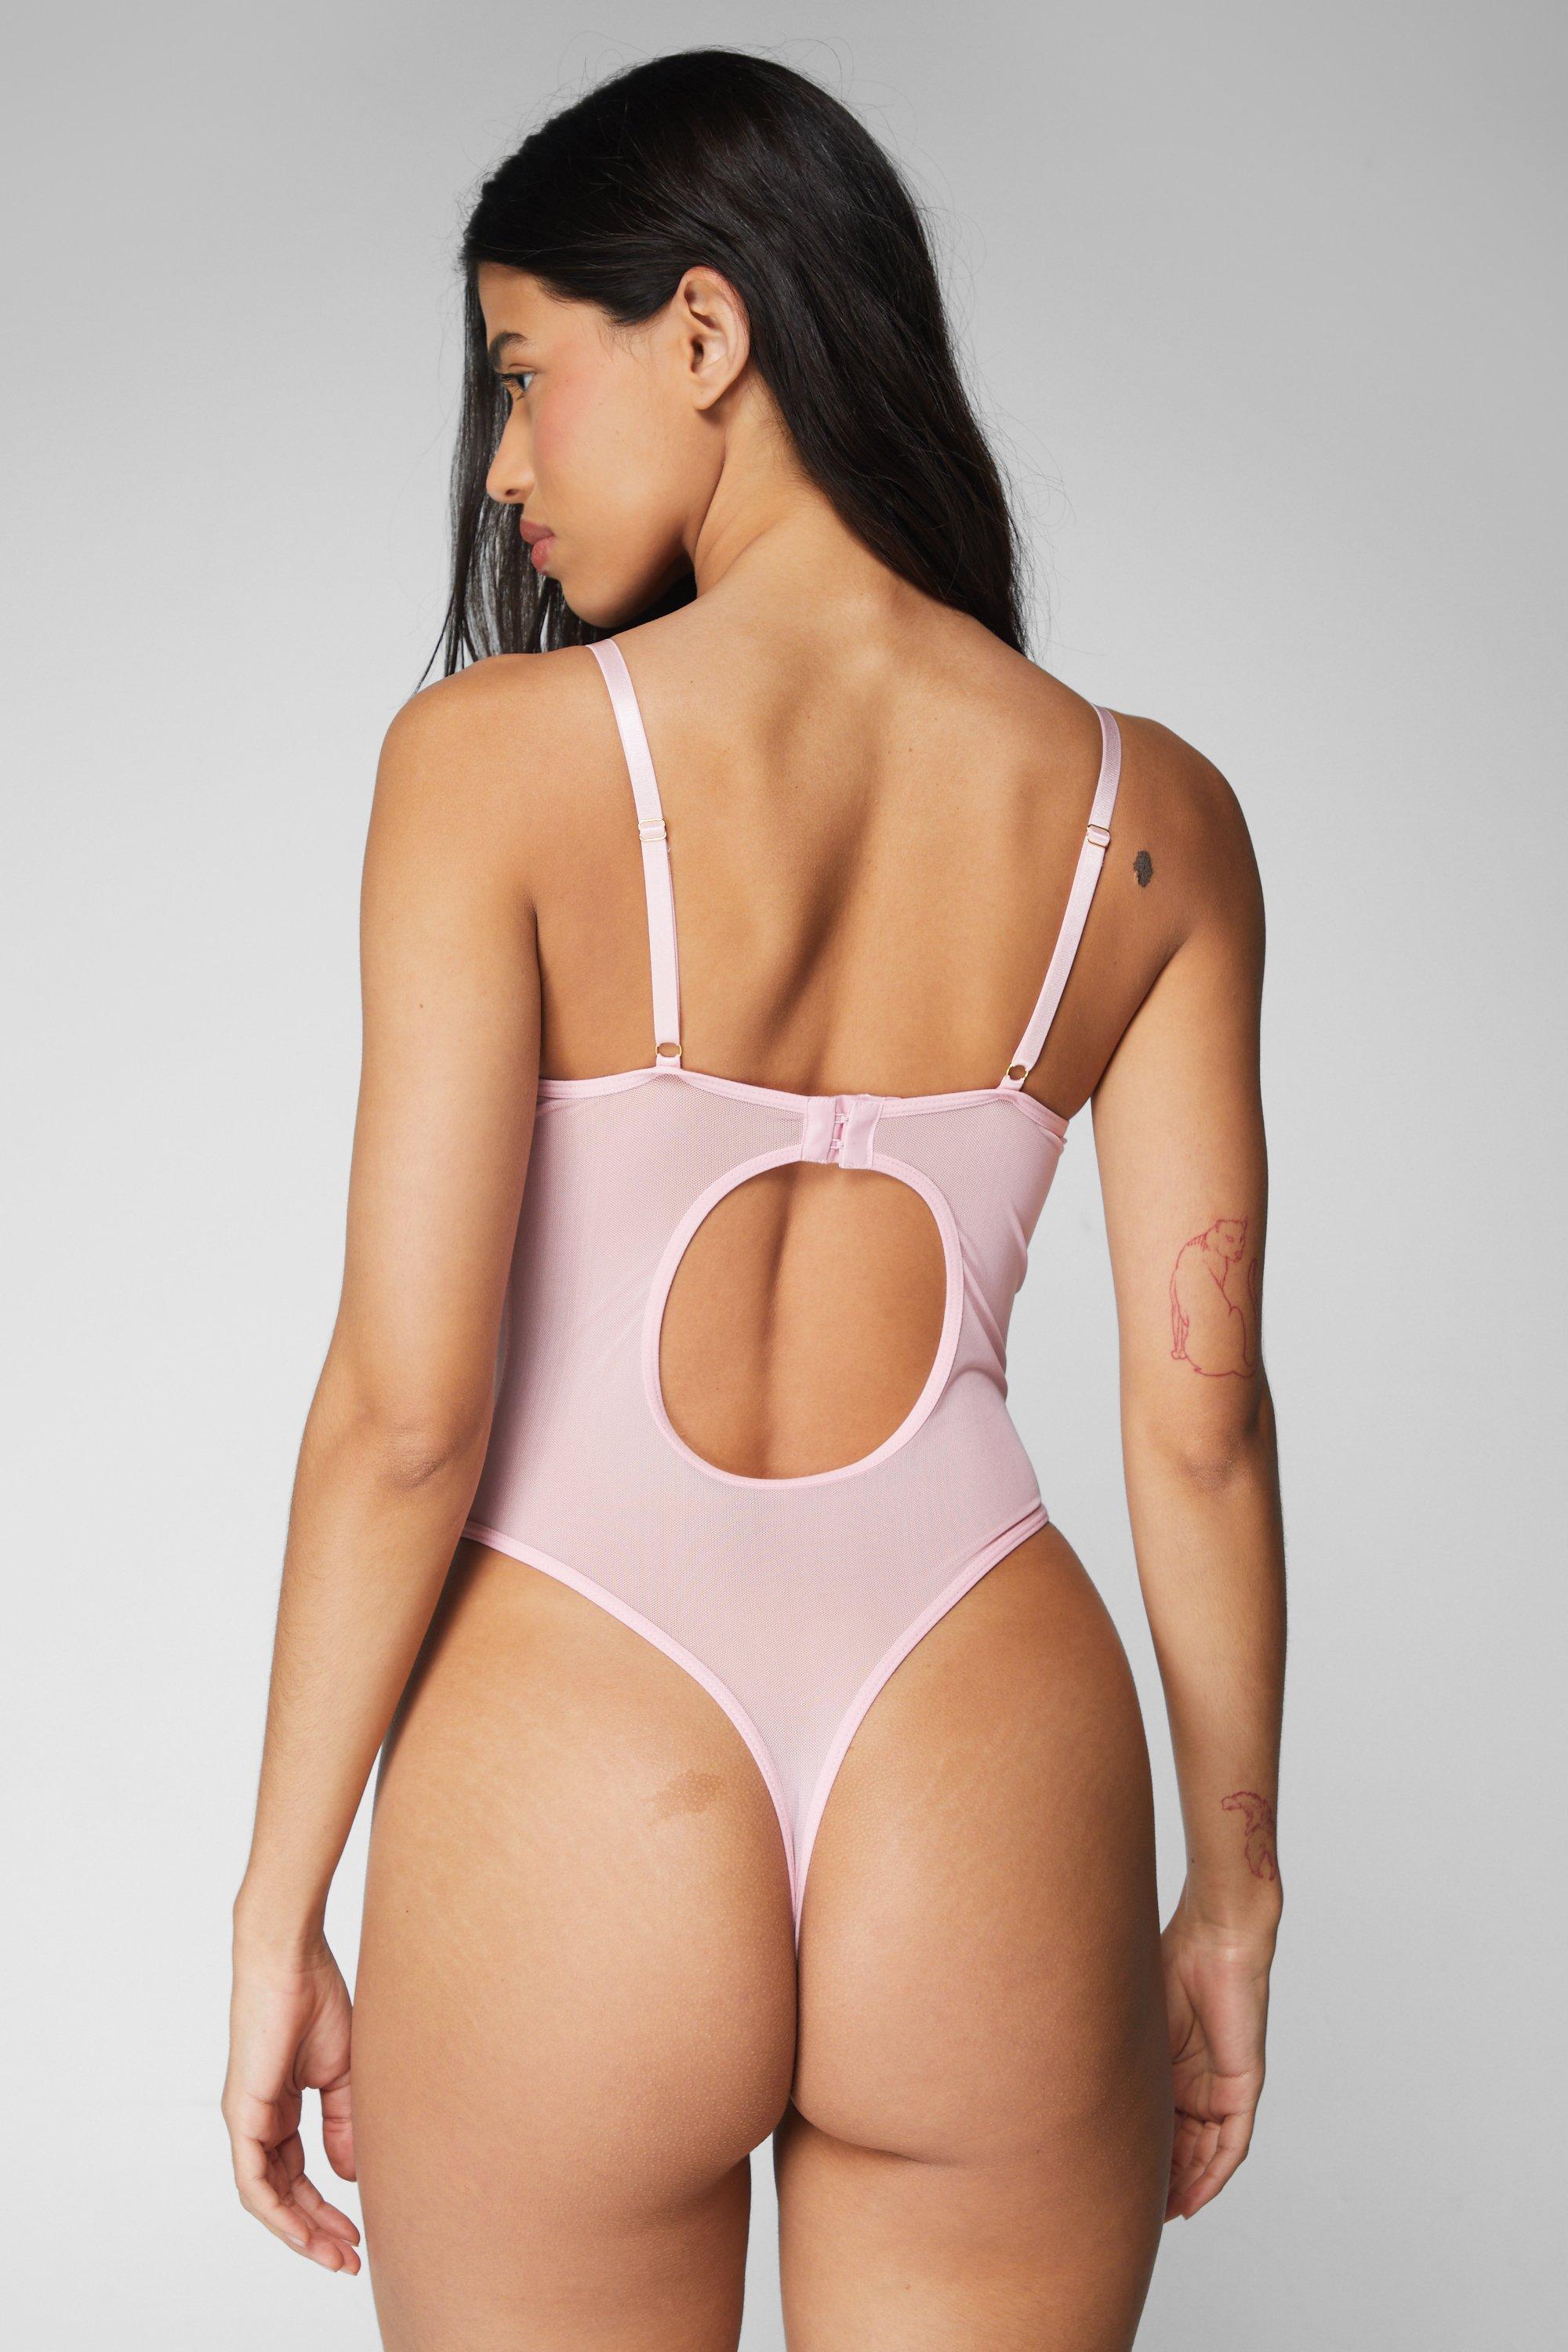 Heart Embroidered Underwire Lingerie Bodysuit